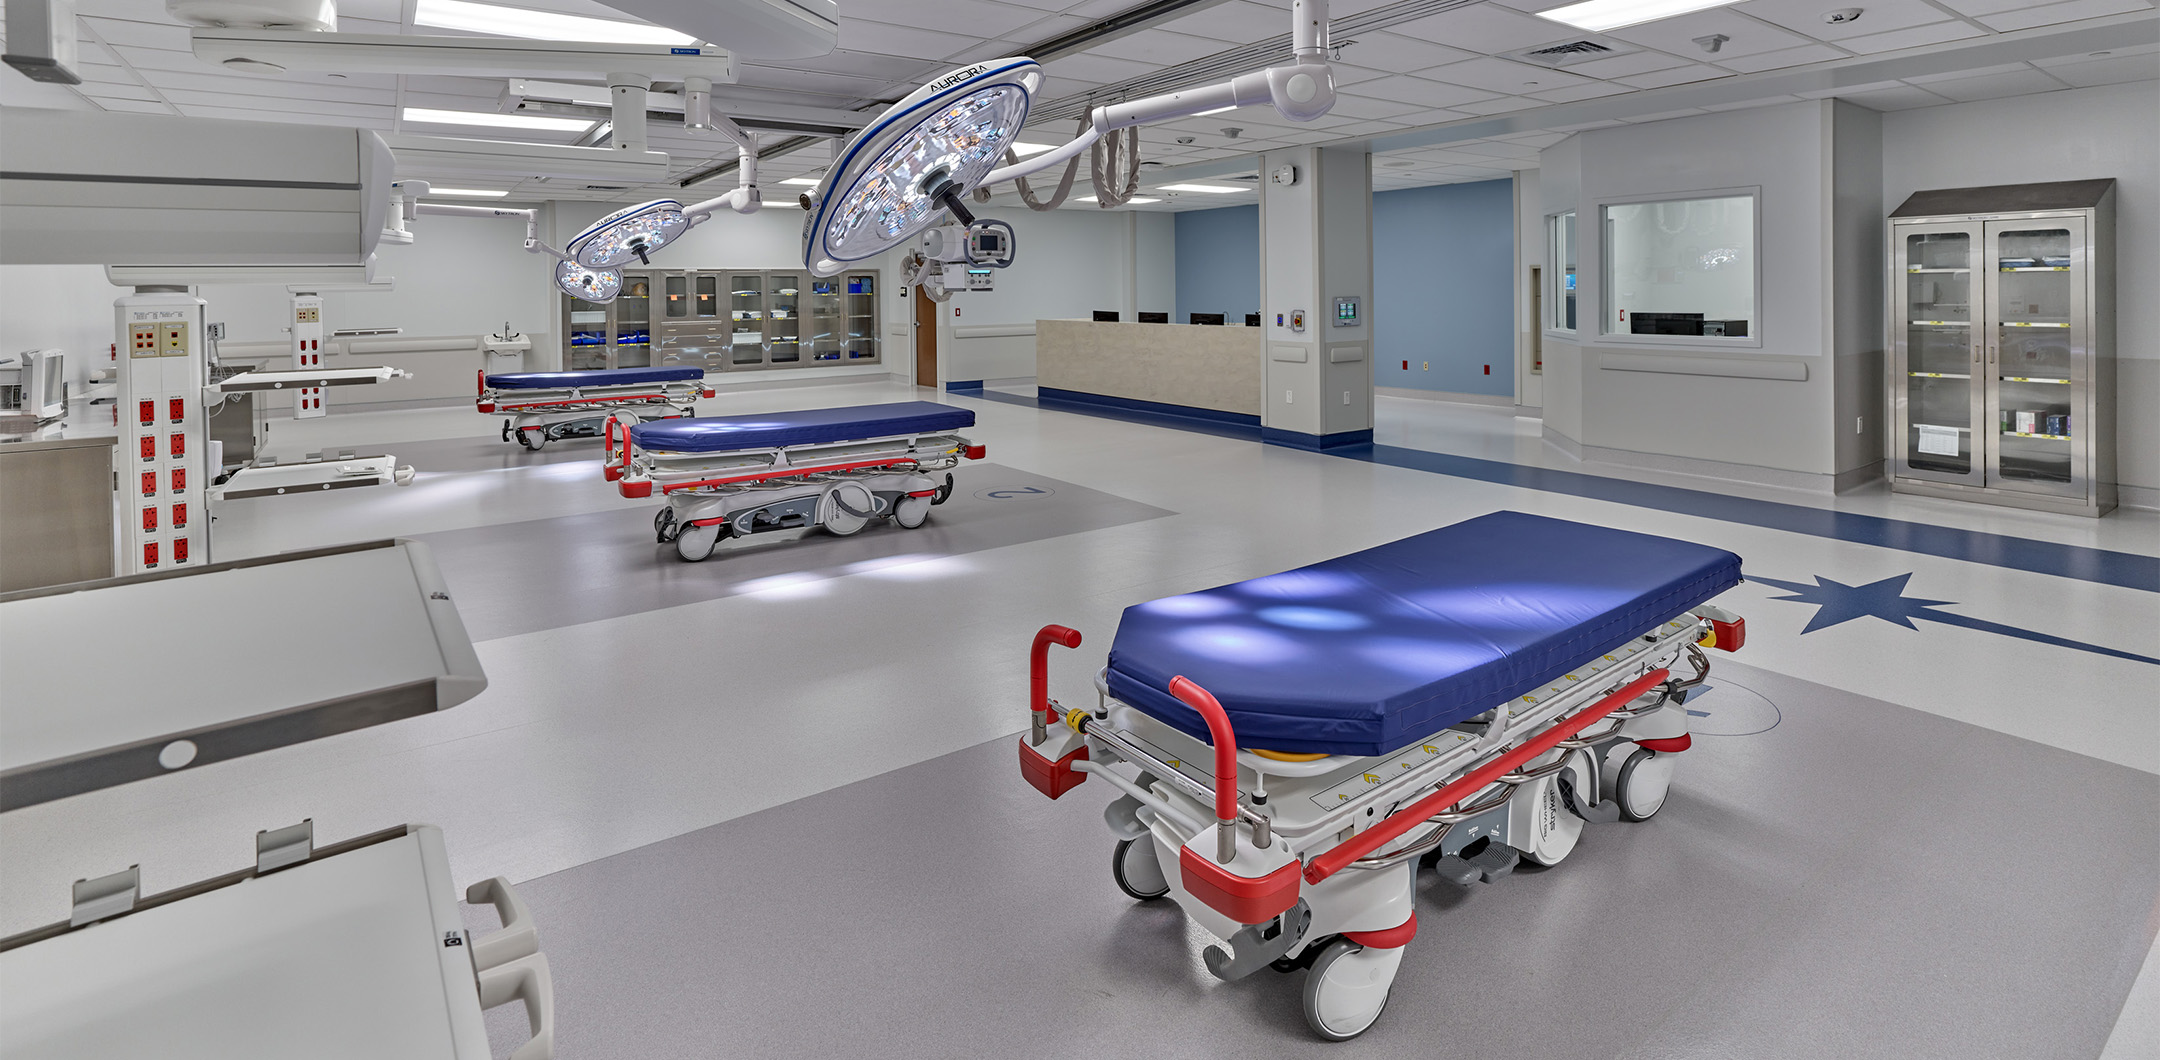 The interior of the emergency department at St. Luke's Anderson Campus featuring blue gurneys in the room